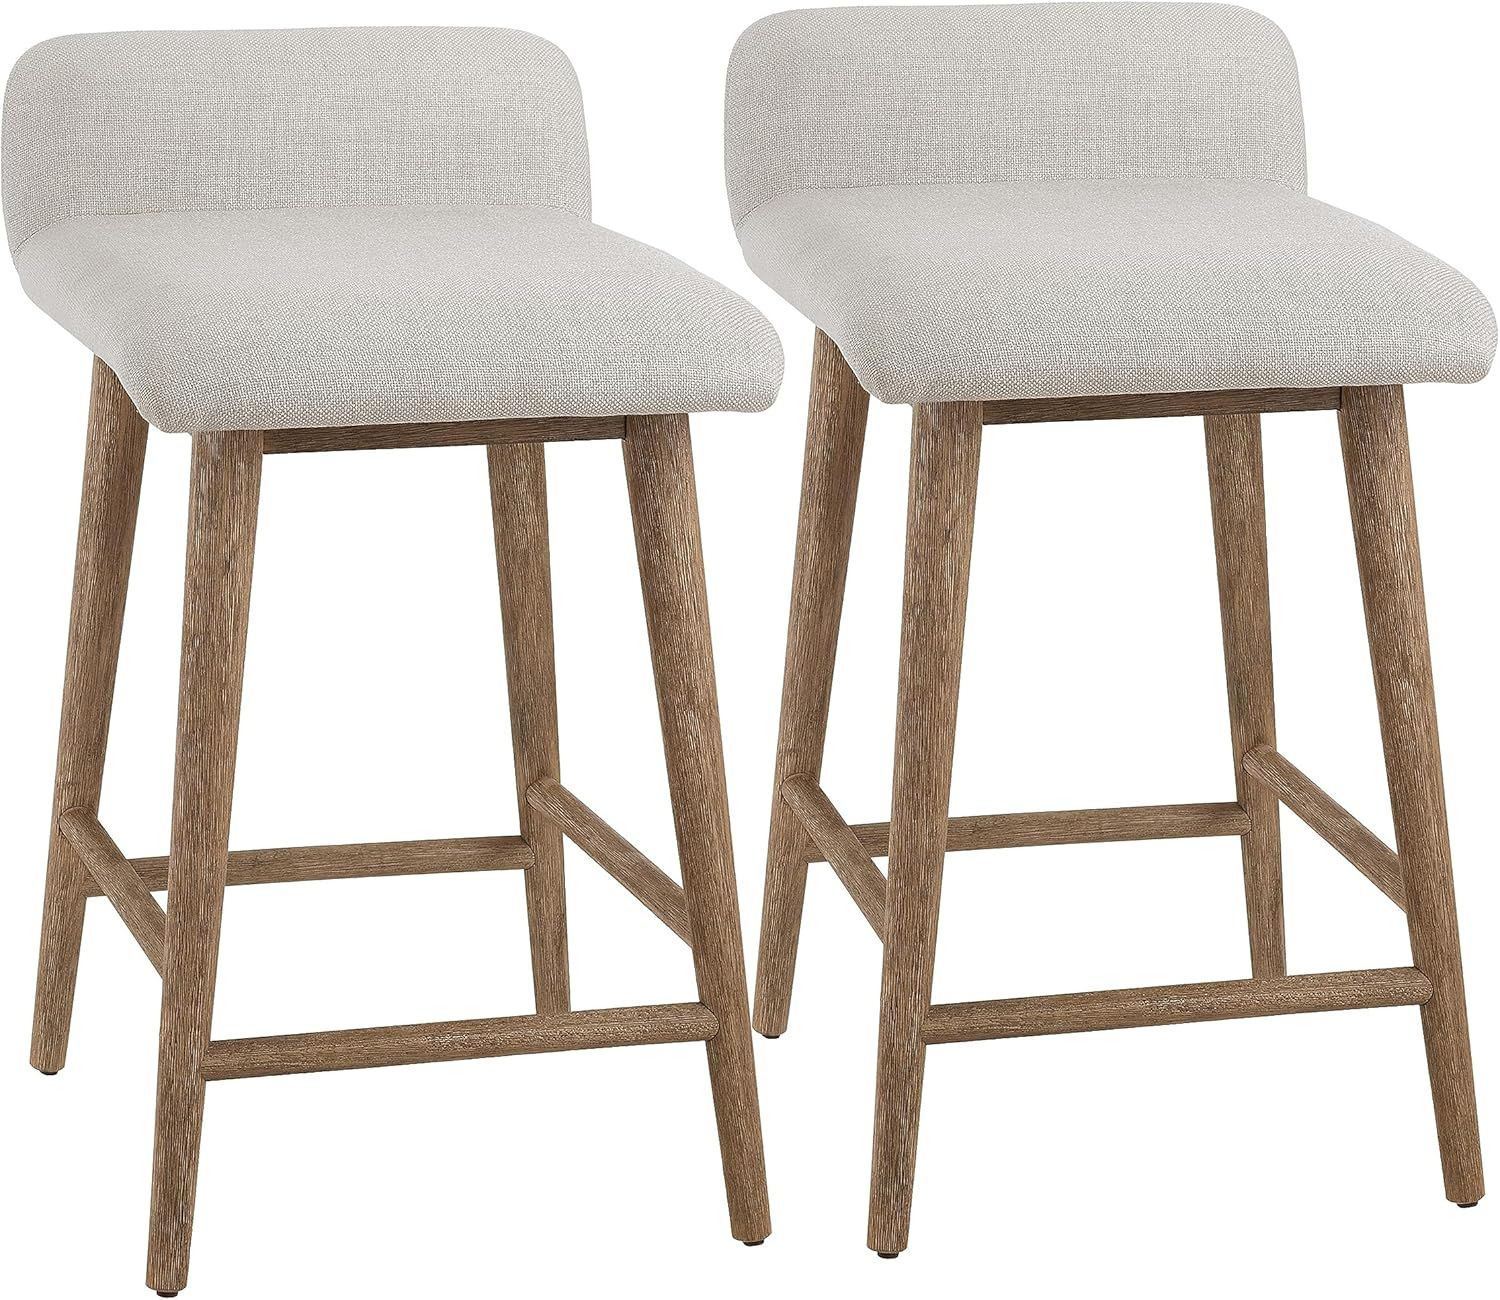 Ball & Cast Upholstered Counter Height Bar Stools 24 inch Low Back Wooden Stools Set of 2, Linen | Amazon (US)